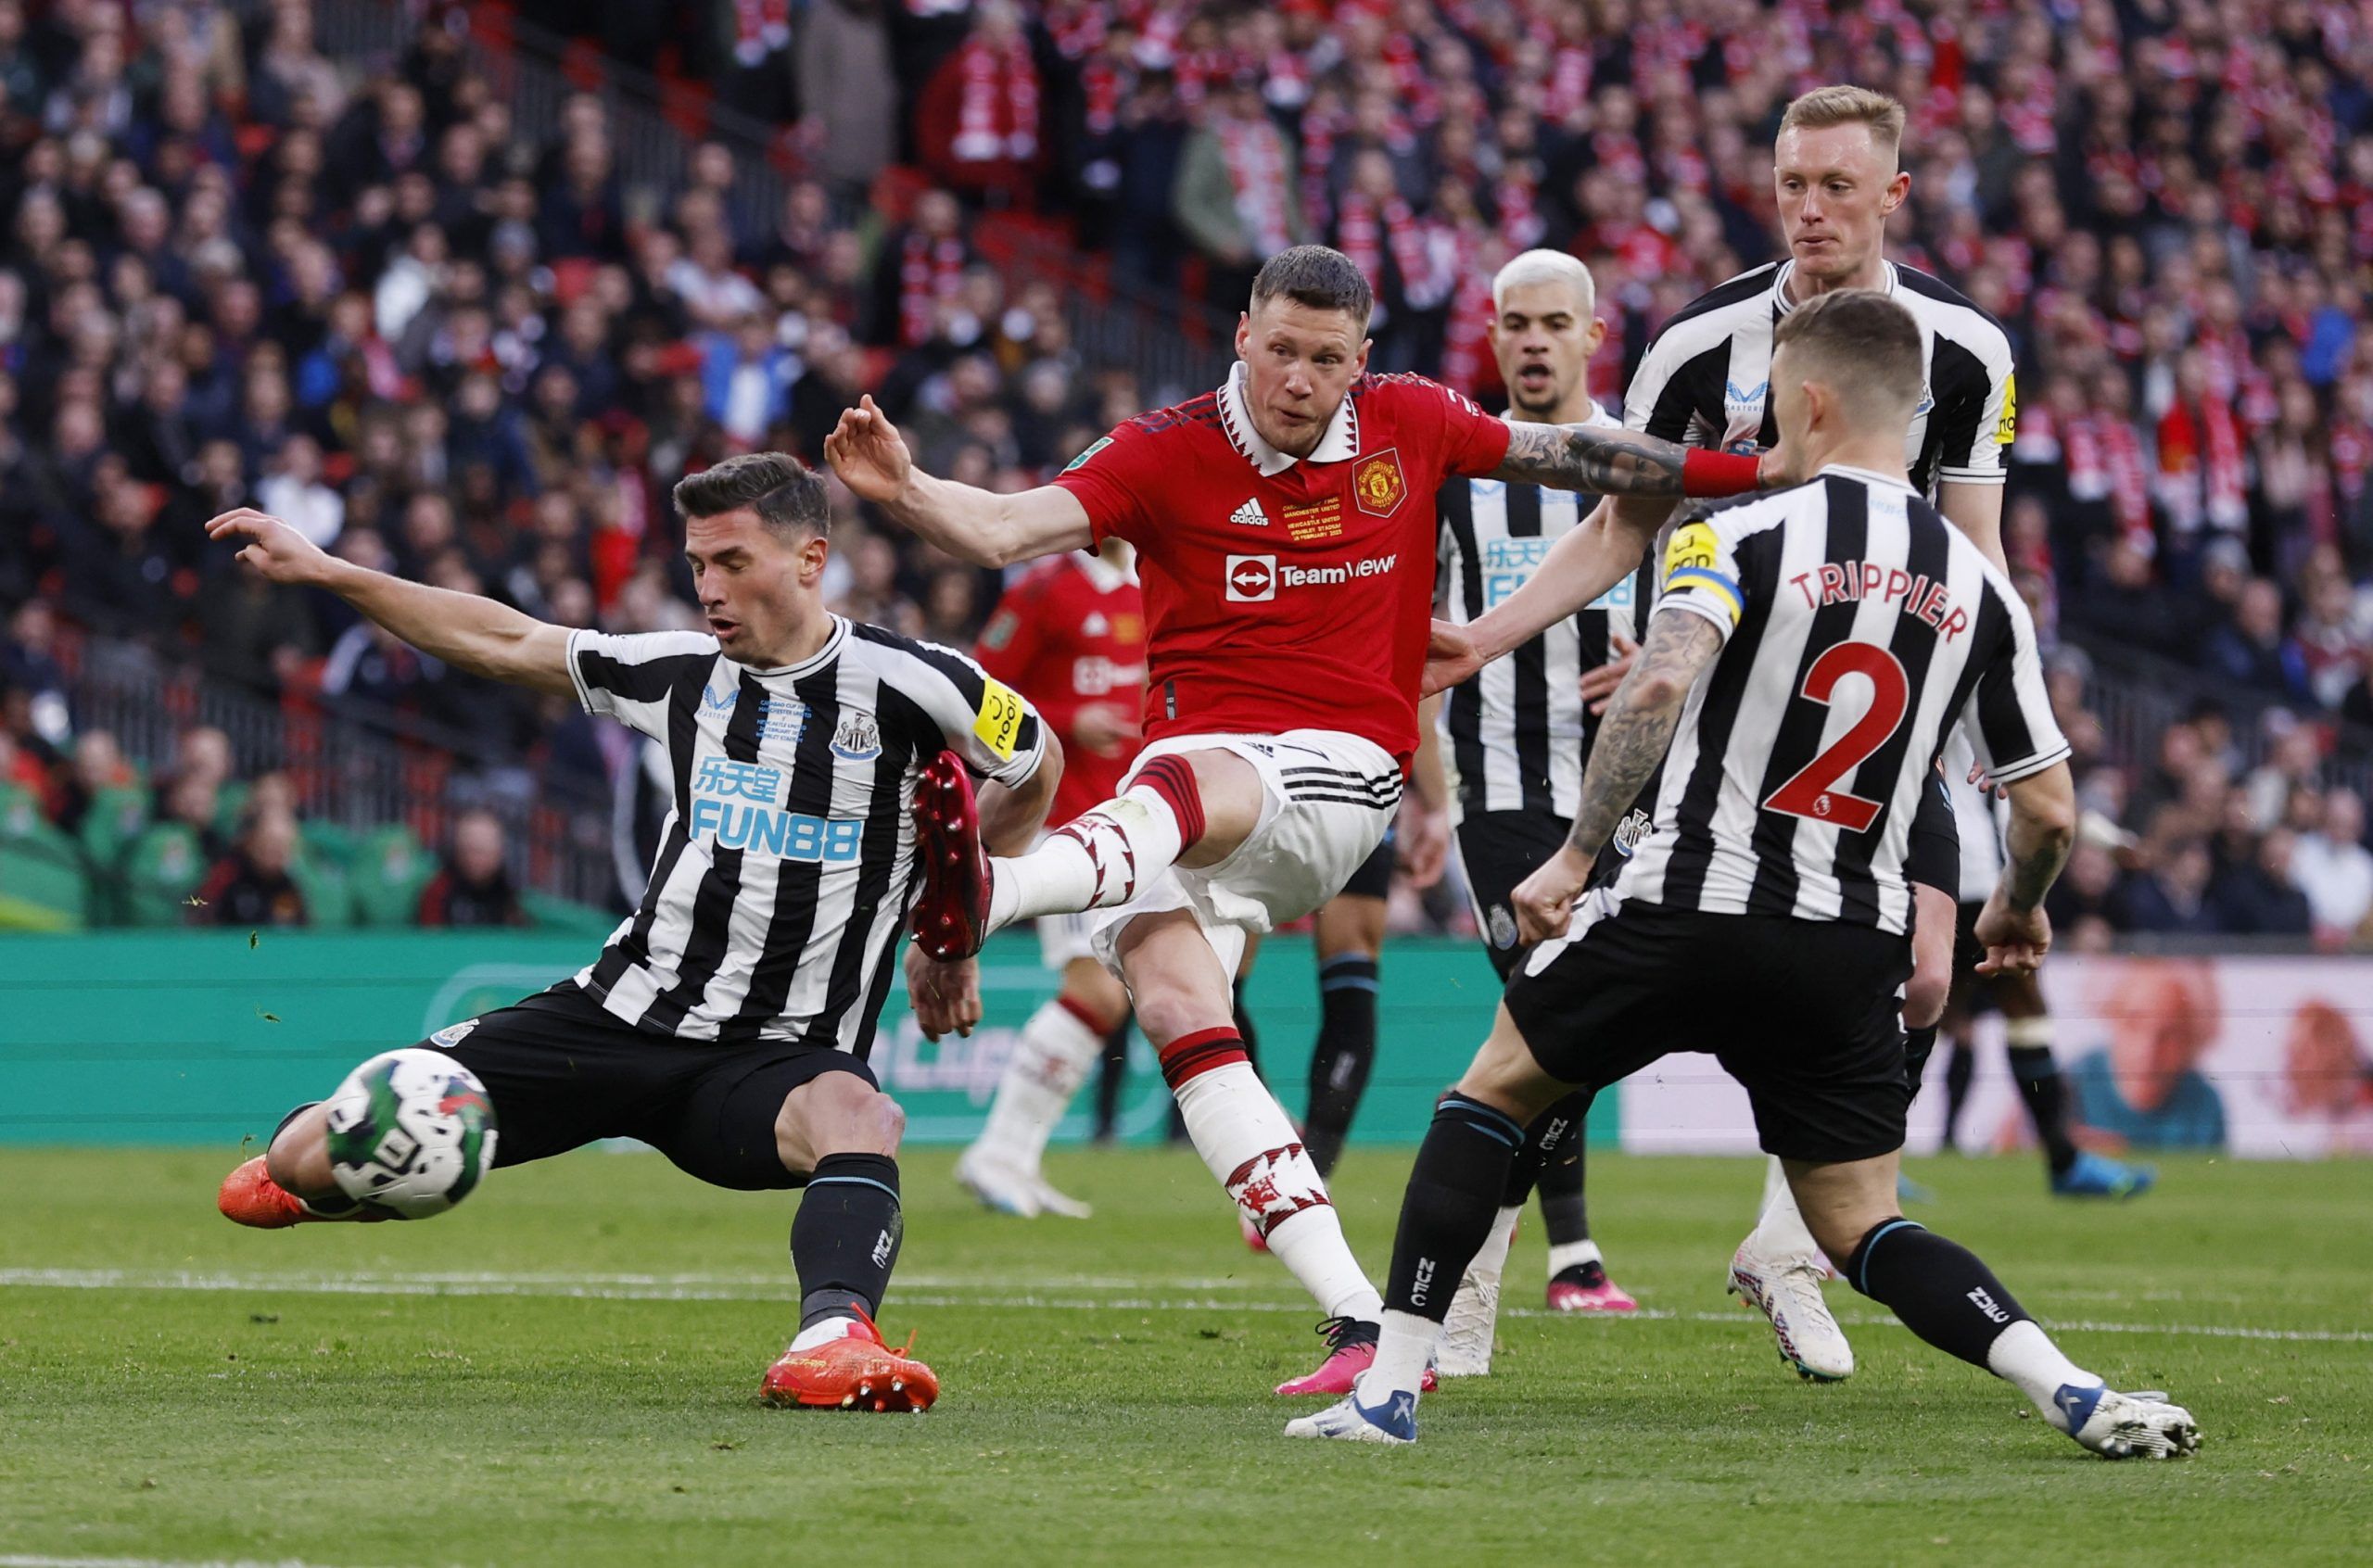 Soccer Football - Carabao Cup - Final - Manchester United v Newcastle United - Wembley Stadium, London, Britain - February 26, 2023  Newcastle United's Fabian Schar in action as Manchester United's Wout Weghorst shoots at goal Action Images via Reuters/Andrew Couldridge EDITORIAL USE ONLY. No use with unauthorized audio, video, data, fixture lists, club/league logos or 'live' services. Online in-match use limited to 75 images, no video emulation. No use in betting, games or single club /league/p